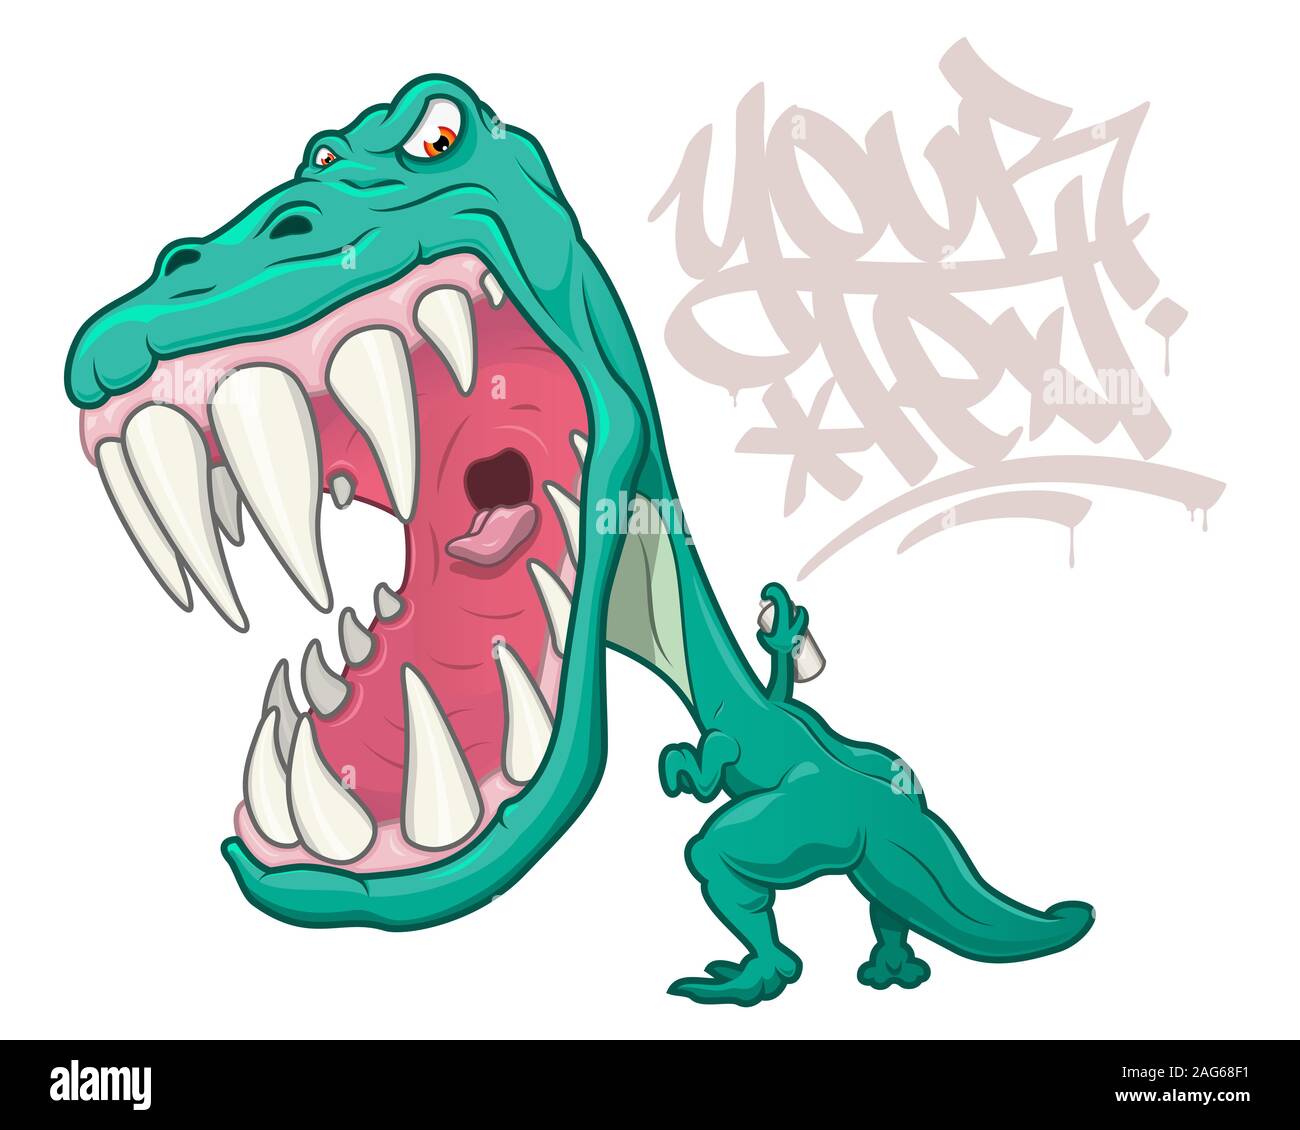 An angry tyrannosaurus rex roaring and writing graffiti in cartoon style. Isolated on white with space for placing text. Stock Vector